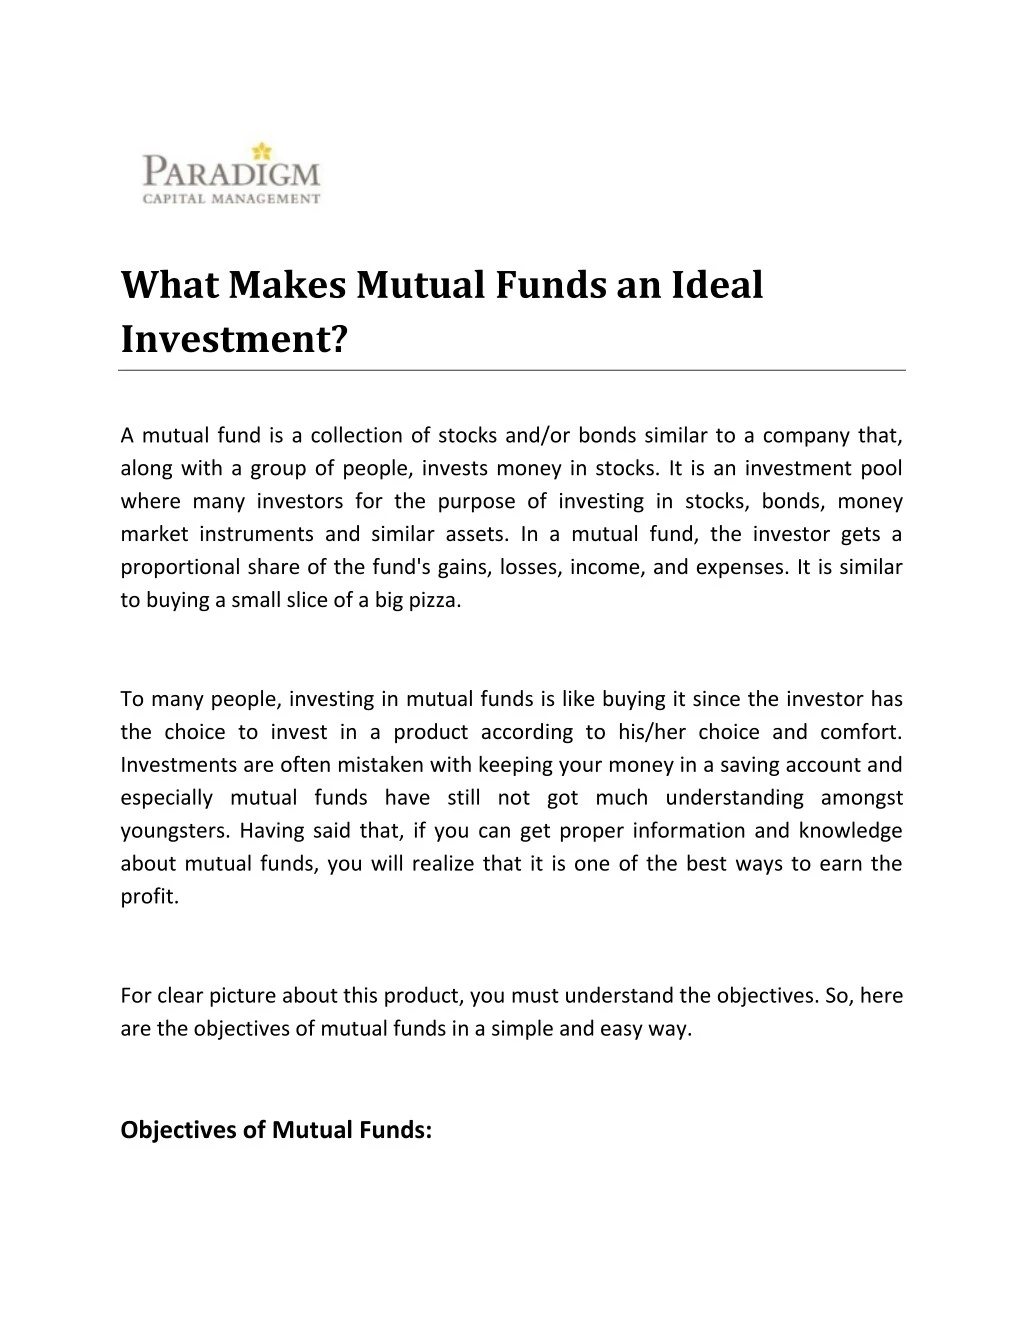 what makes mutual funds an ideal investment